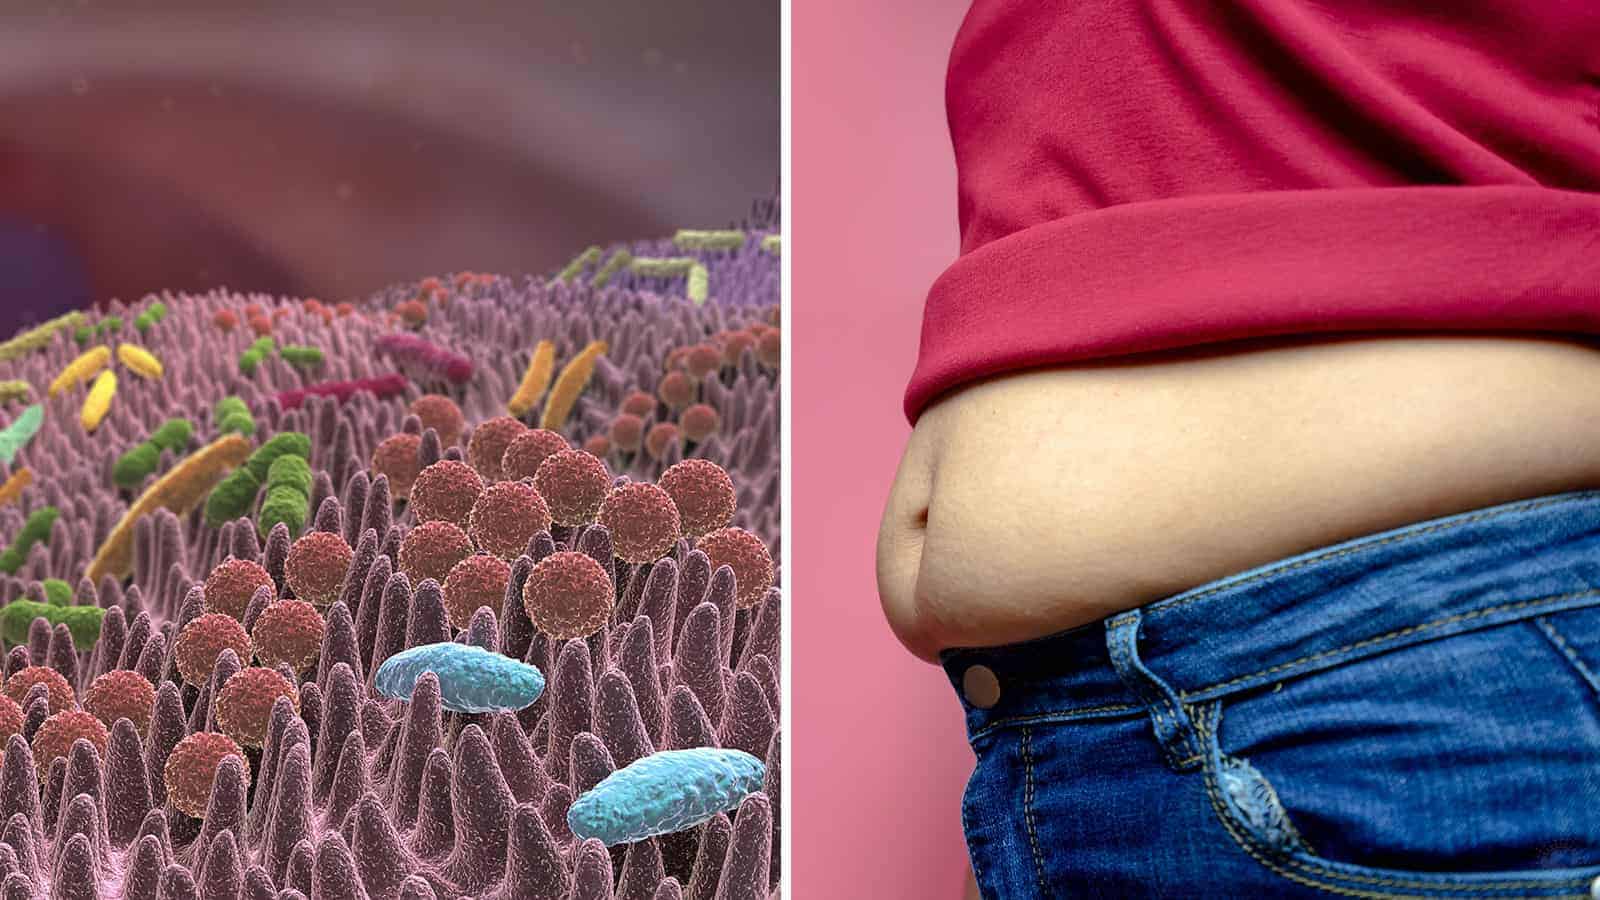 Scientists Reveal Link Between Gut Bacteria and Waist Size